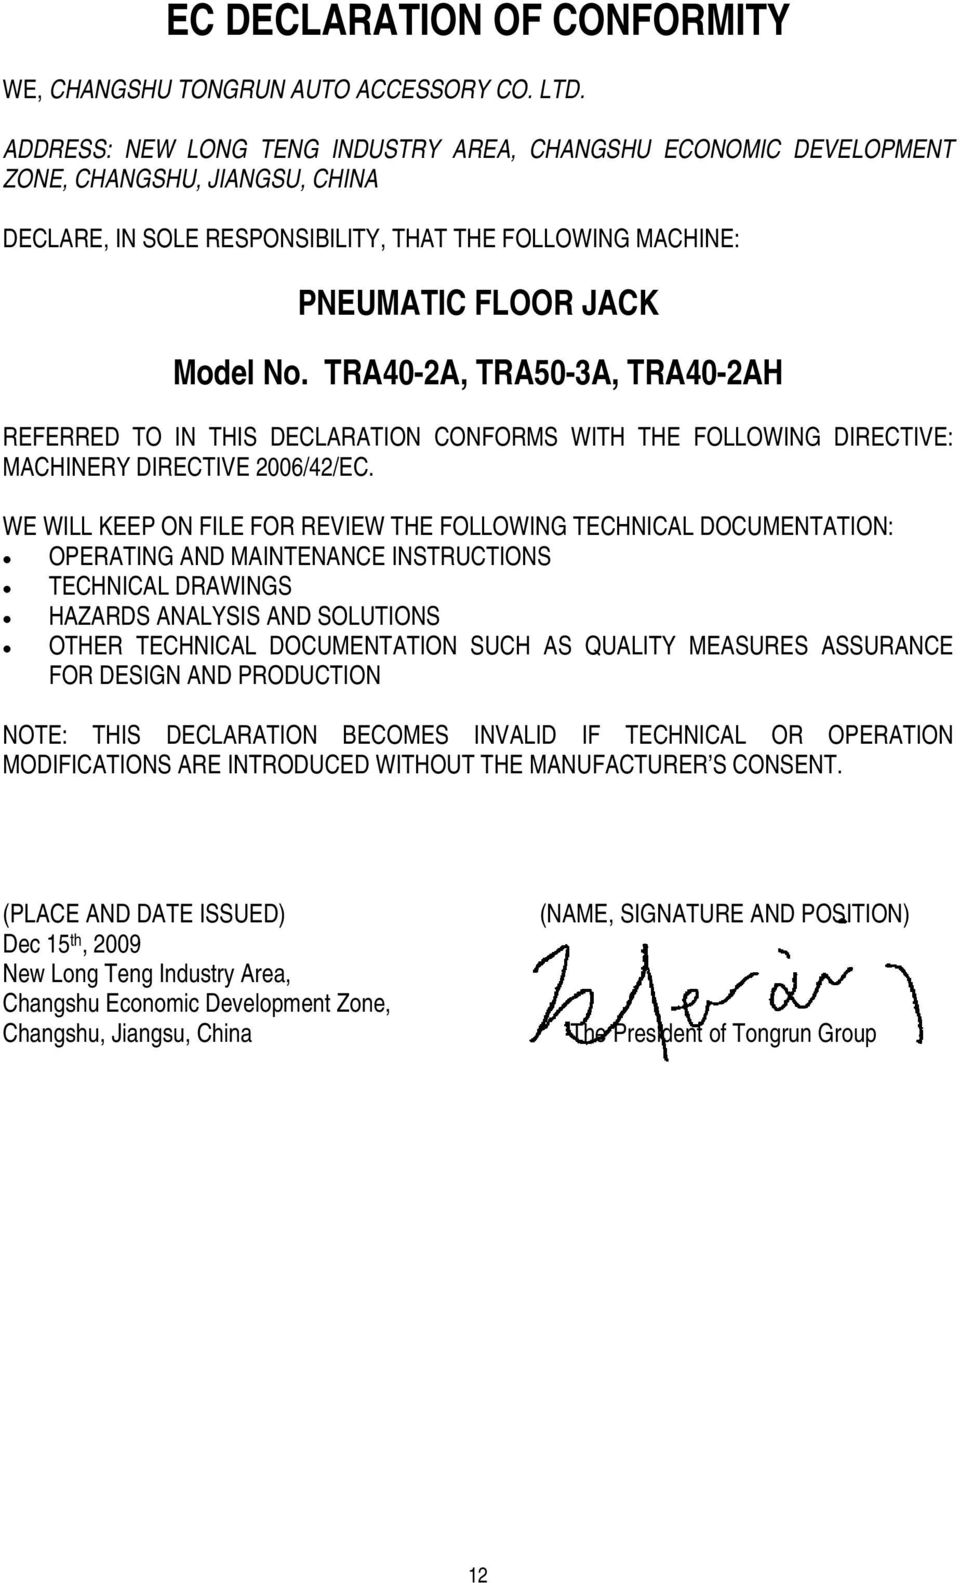 TRA40-2A, TRA50-3A, TRA40-2AH REFERRED TO IN THIS DECLARATION CONFORMS WITH THE FOLLOWING DIRECTIVE: MACHINERY DIRECTIVE 2006/42/EC.